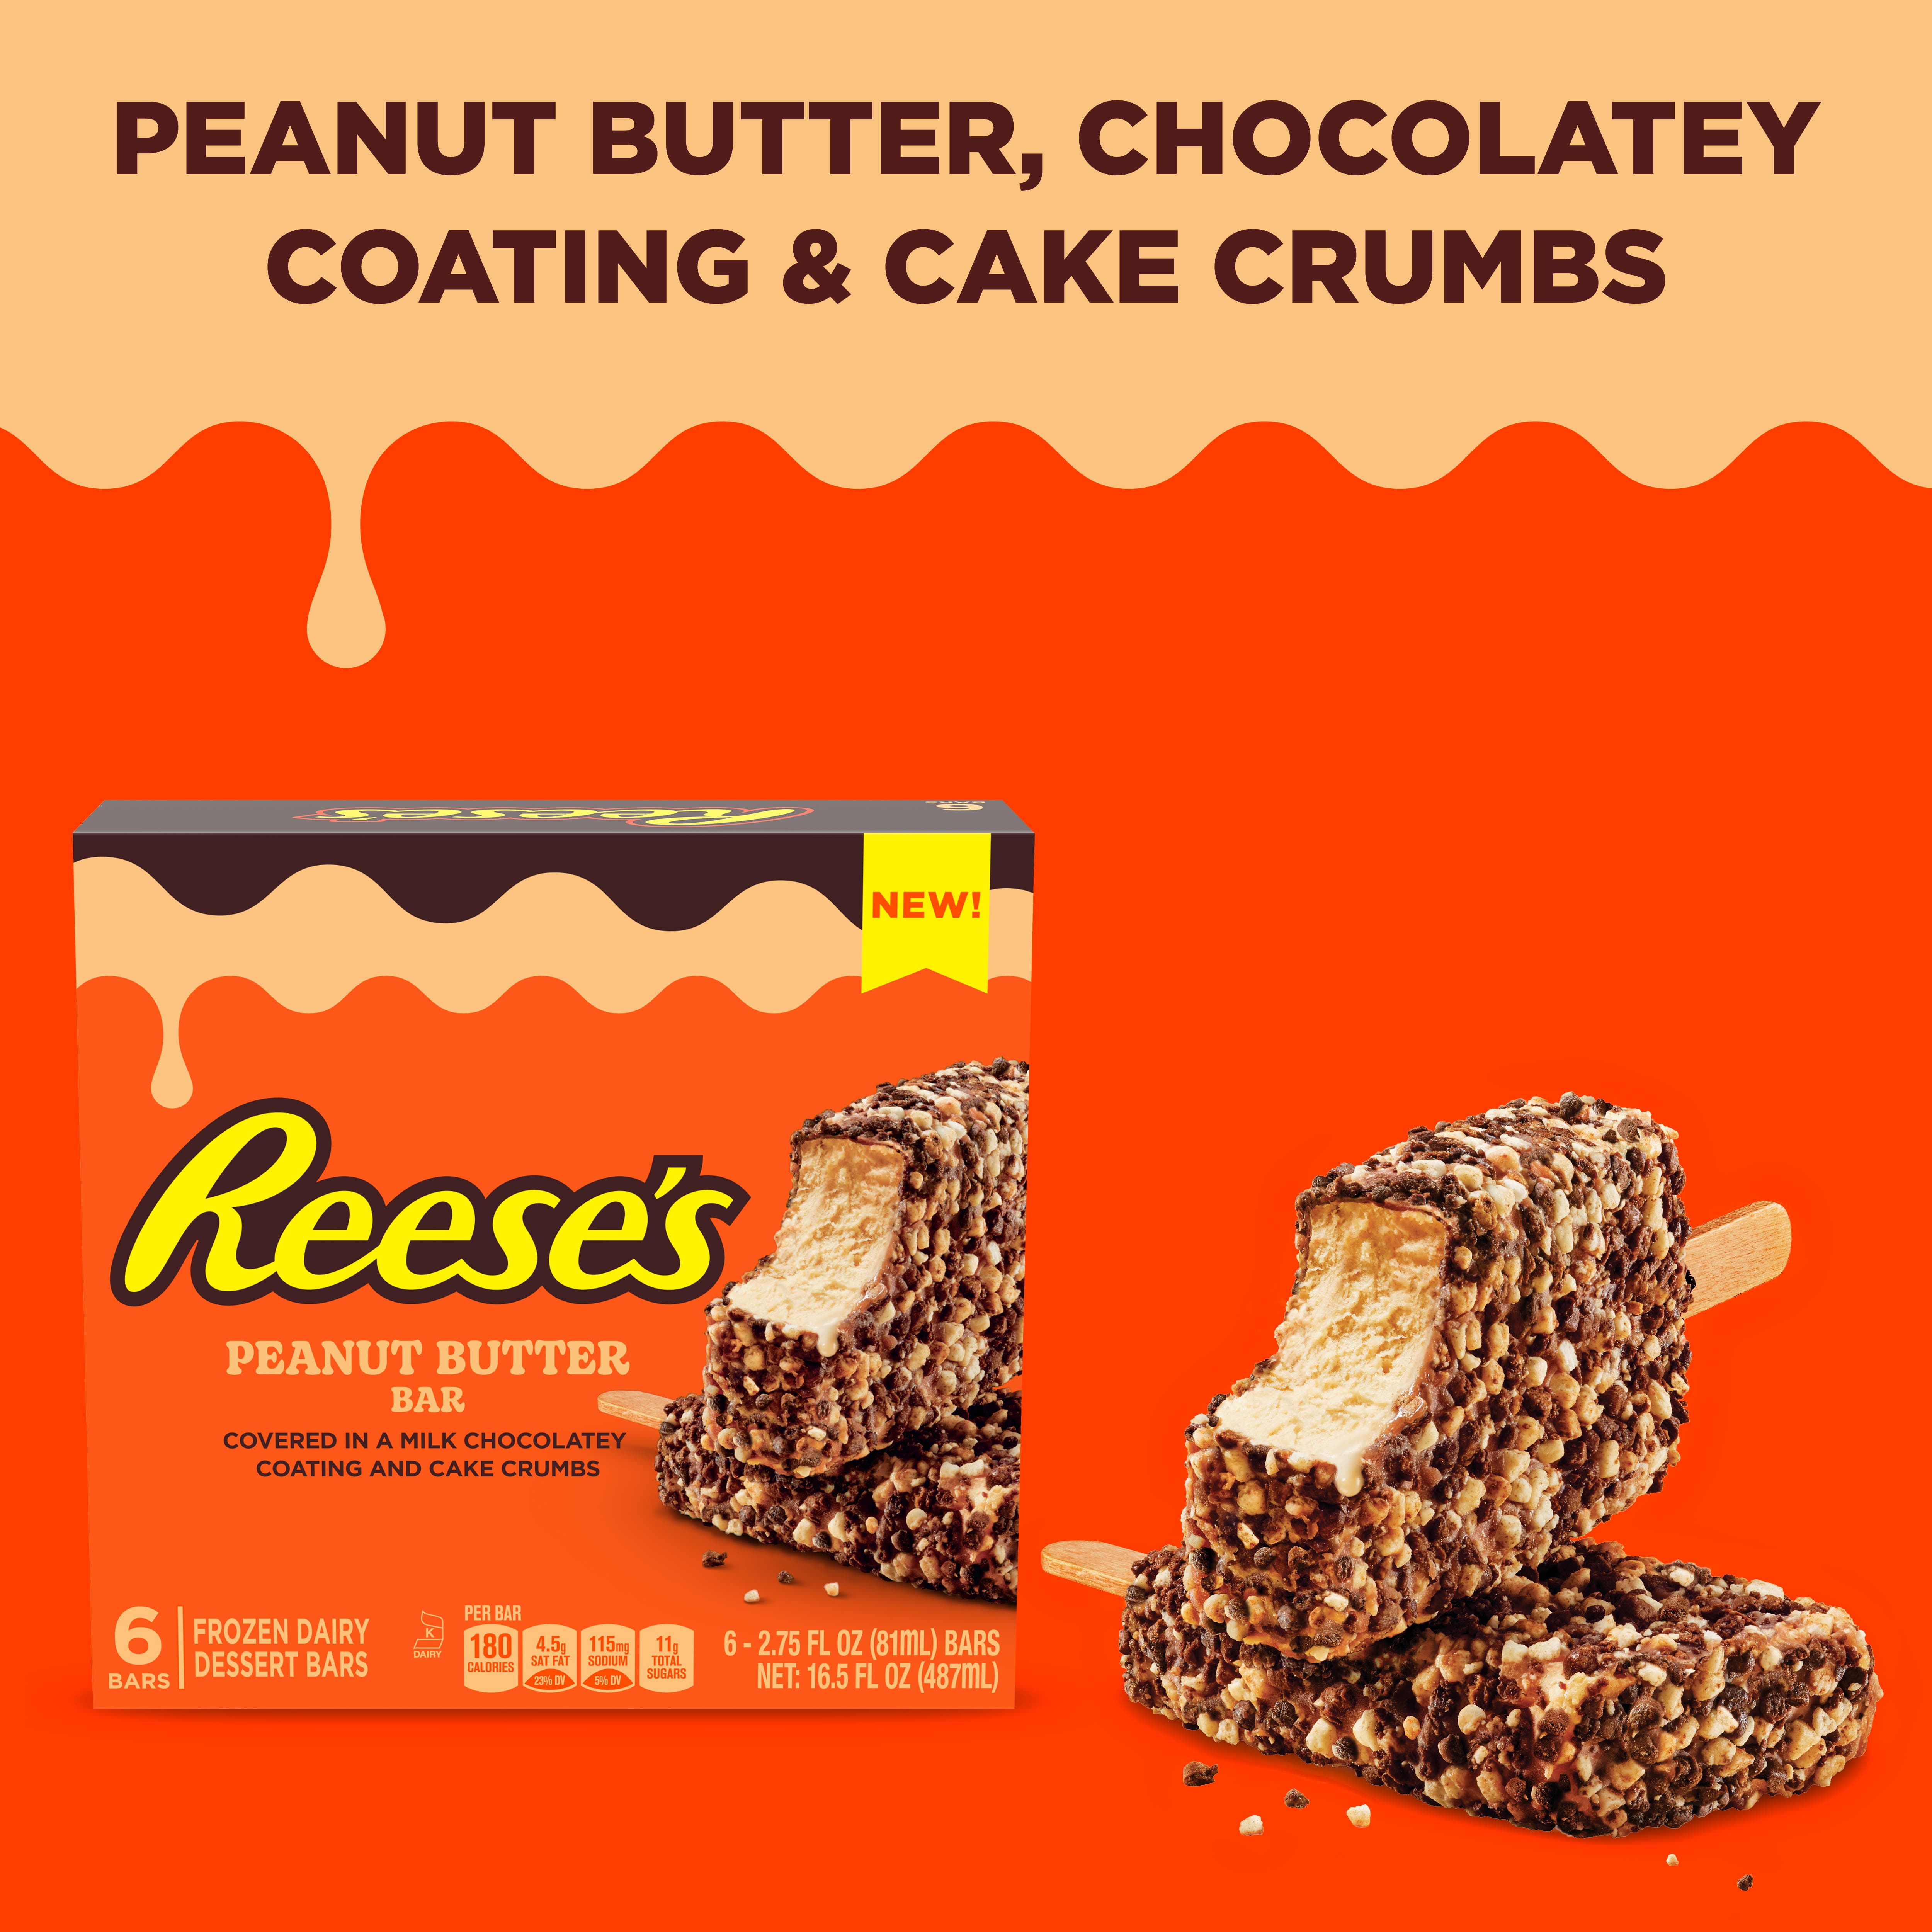 REESE'S Peanut Butter Frozen Dairy Dessert Bar, 2.75 oz, 6 count box - Front of Package - with Bars instead of swirl